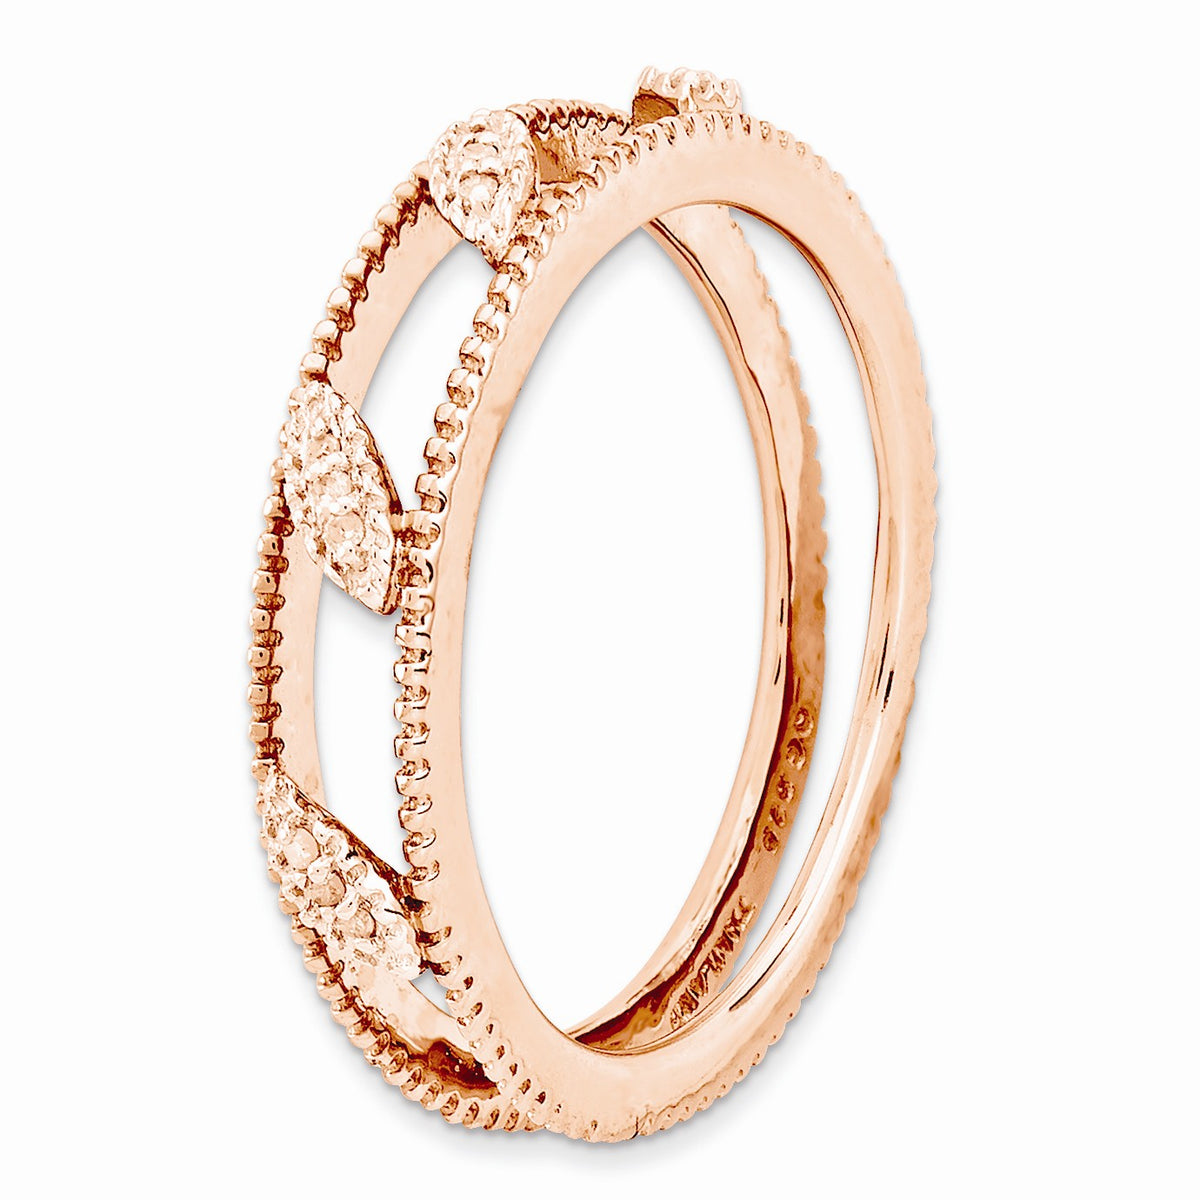 Alternate view of the Rose Gold Tone Plated Sterling Silver Diamond Jacket Stack Ring by The Black Bow Jewelry Co.